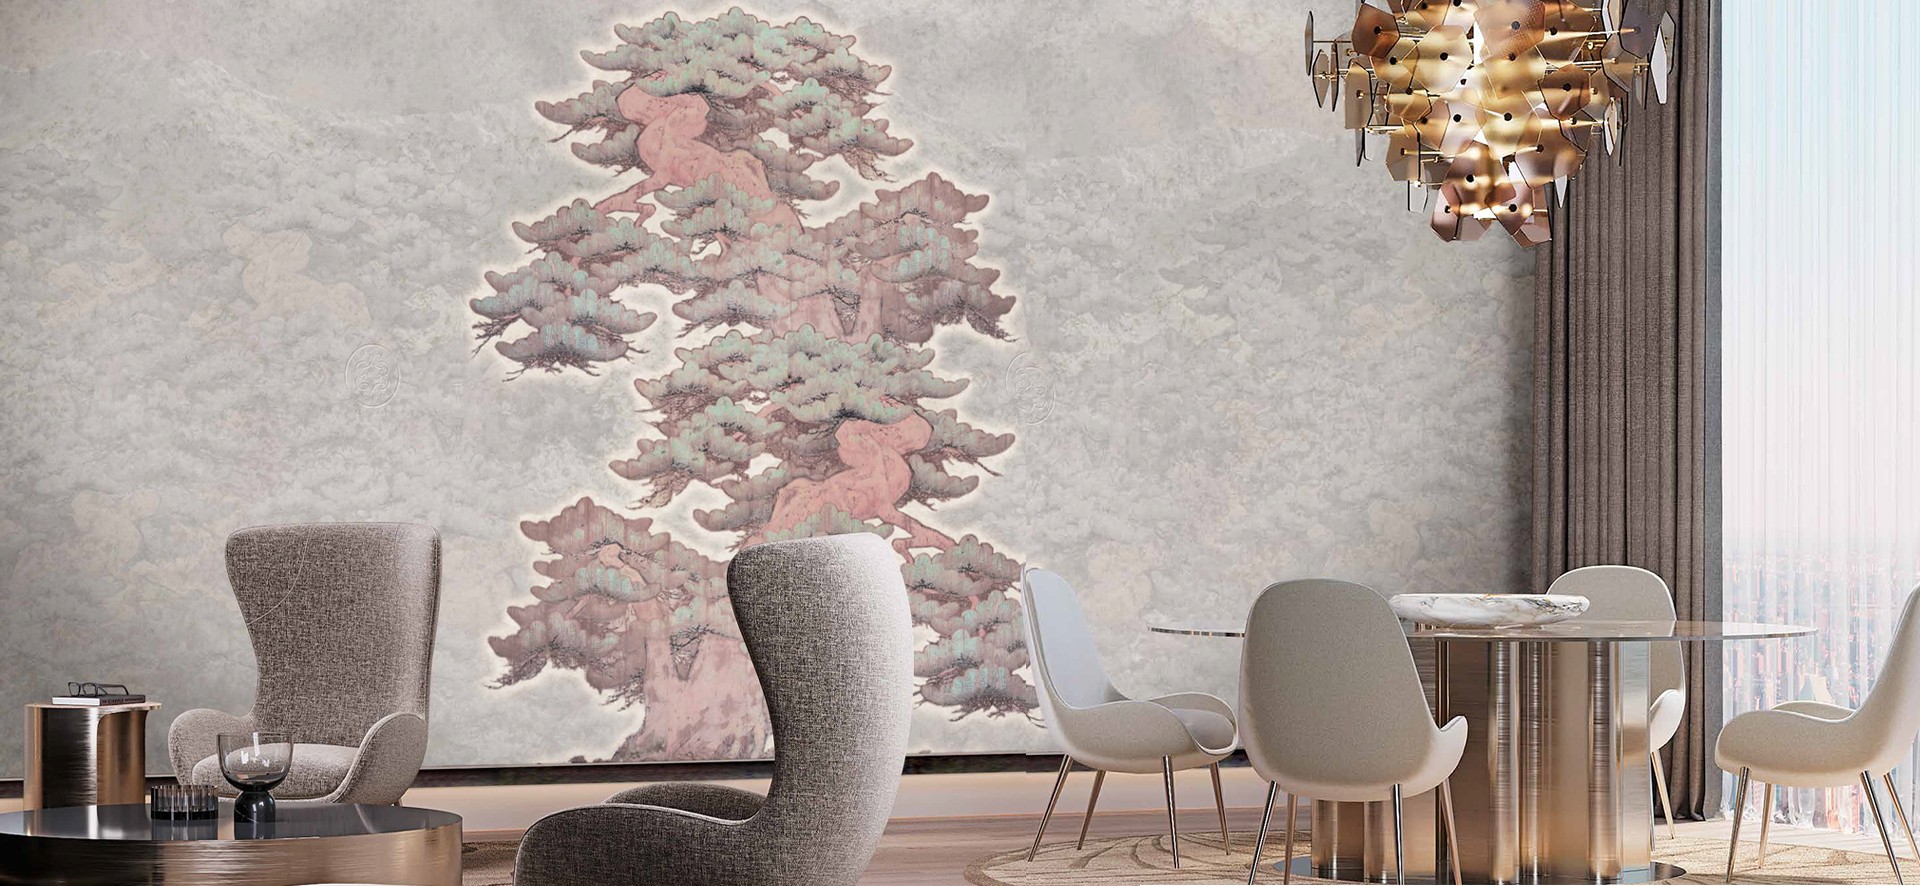 Gianti Wallcovering - Window Designs by Sonia